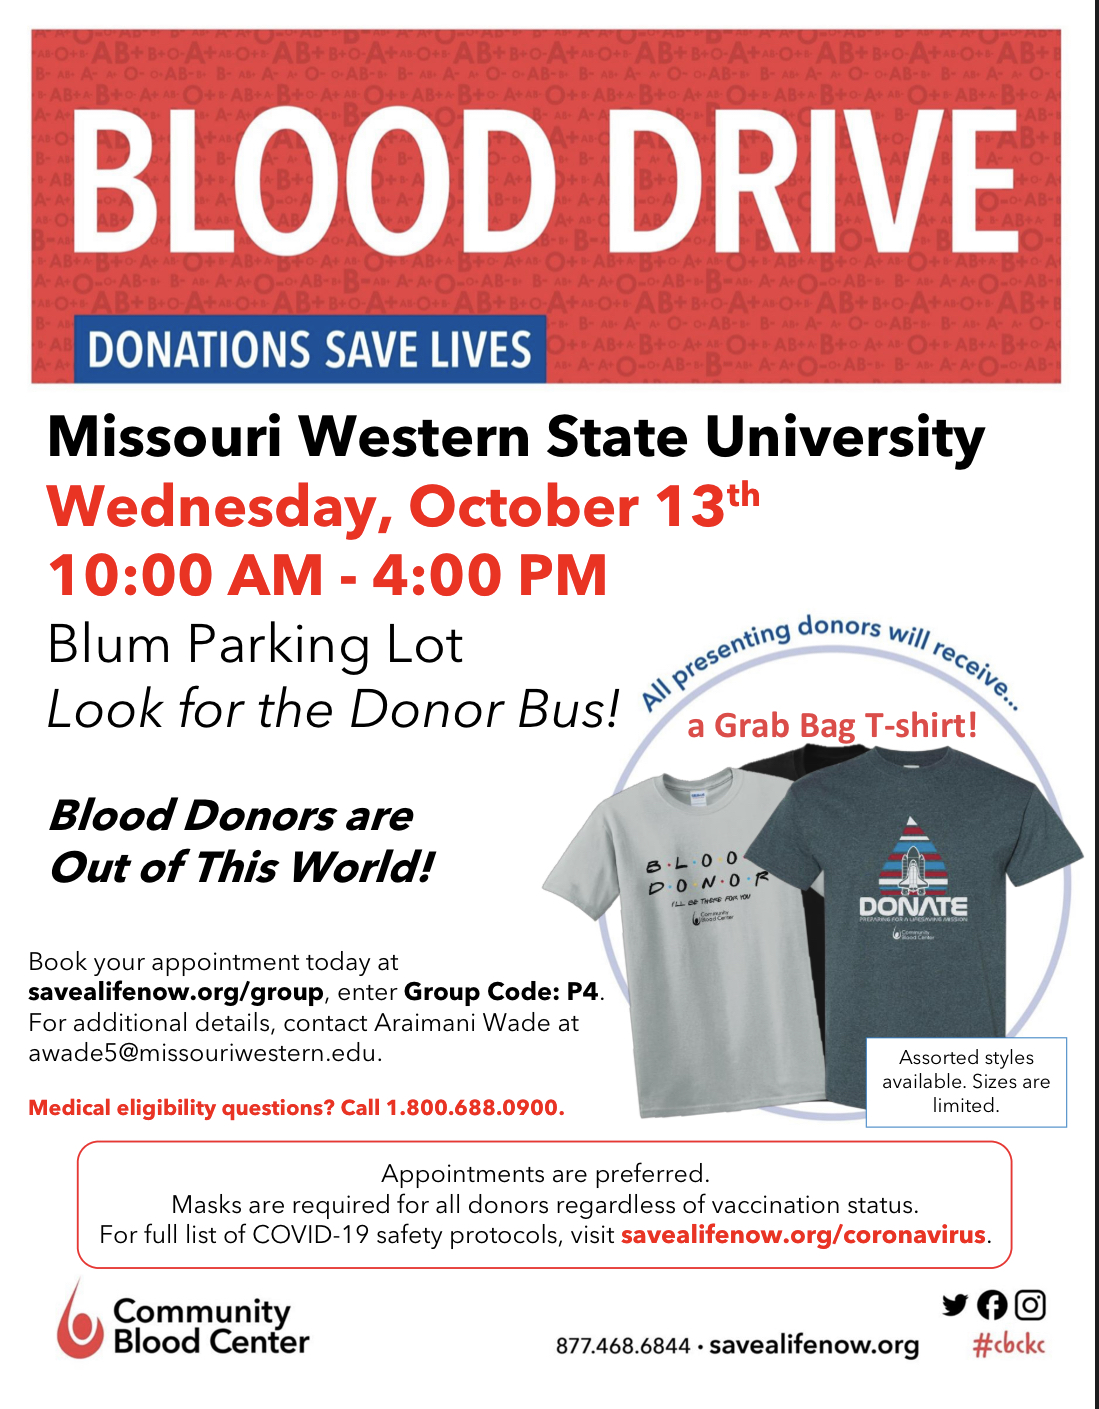 a flyer advertising a blood drive